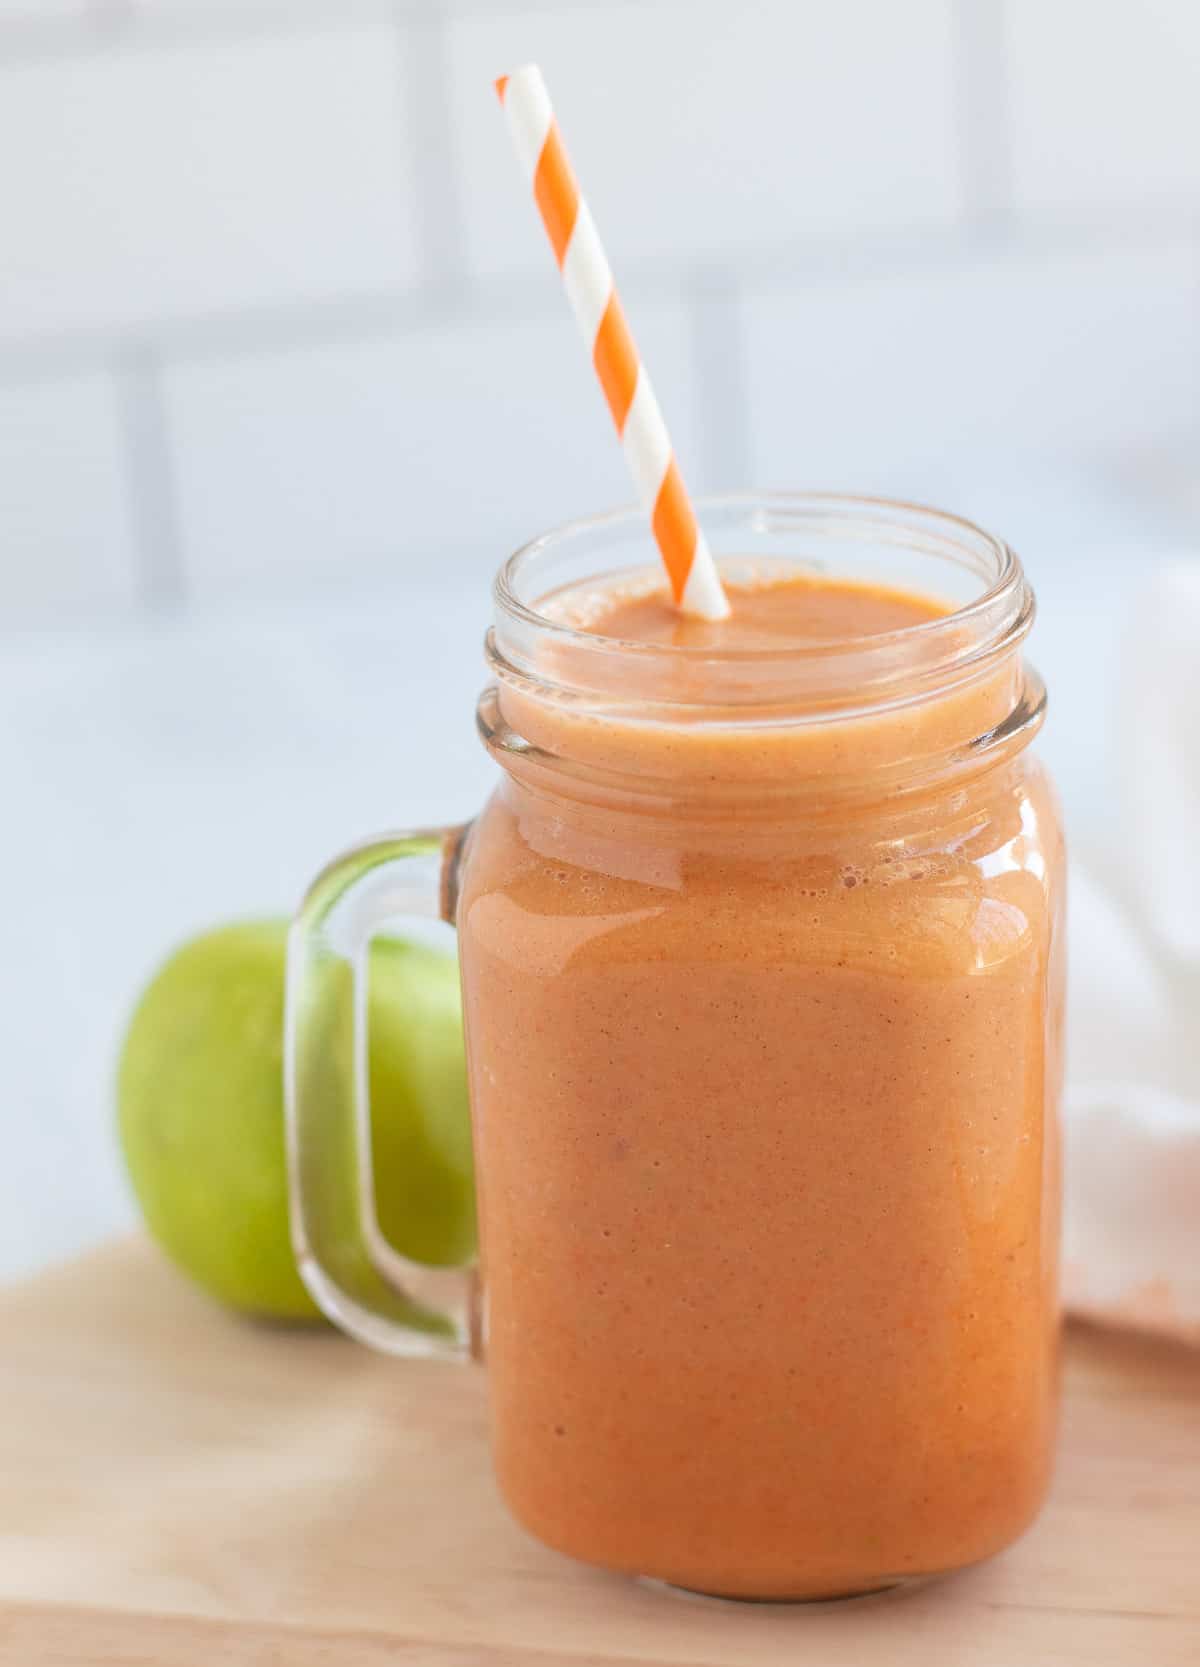 Apple carrot smoothie in glass mug with orange striped straw. 